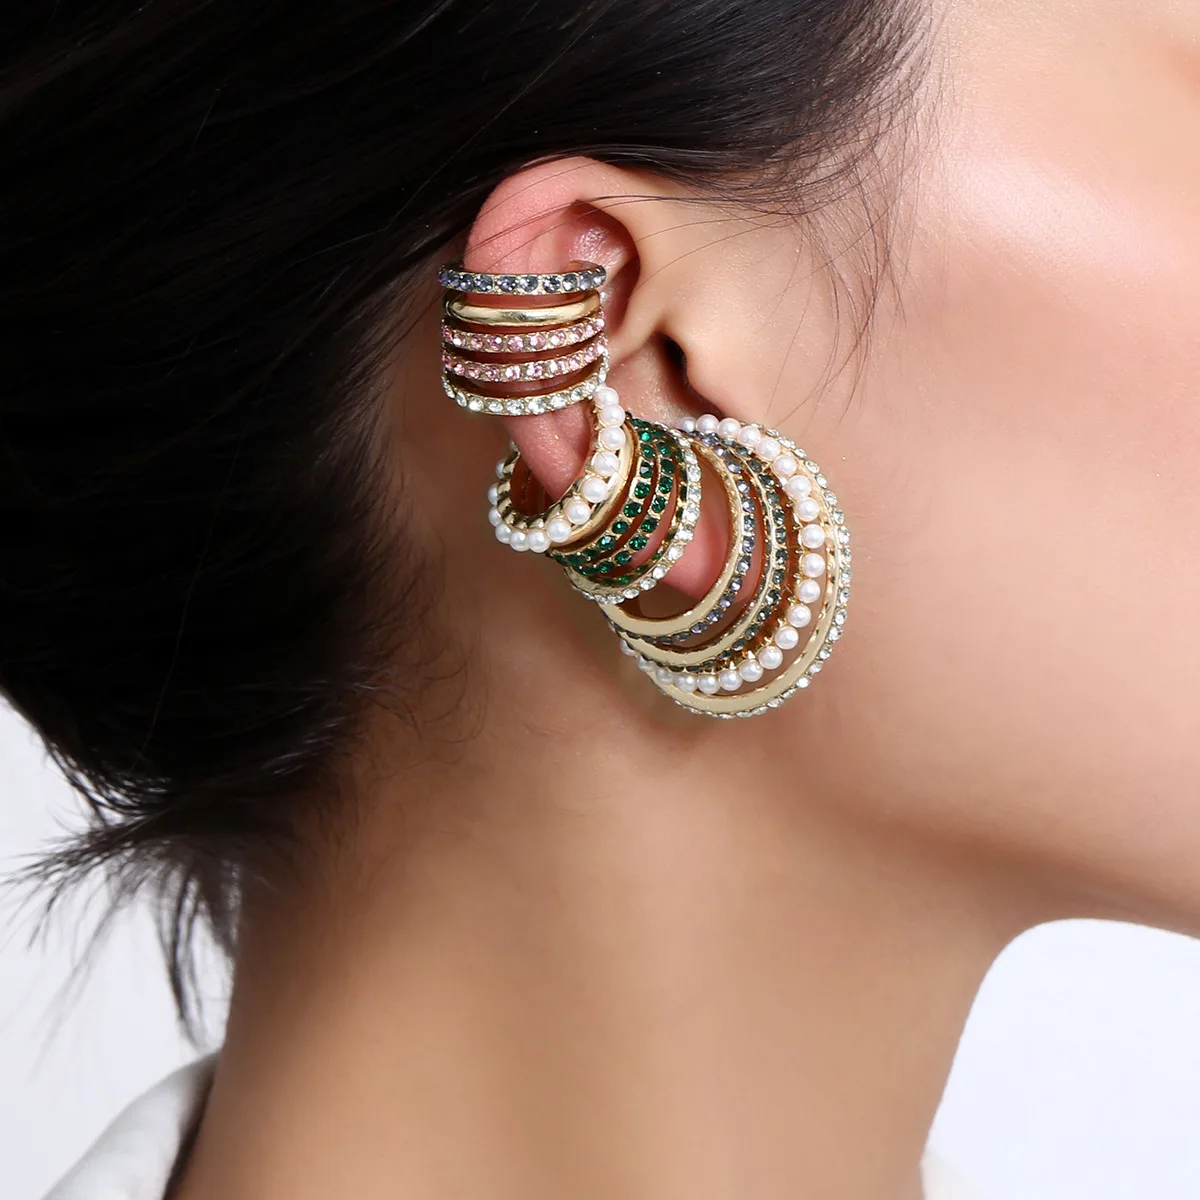 

Best Selling Luxury Gold Non Piercing Multi Layer Circle Cuff Earrings Set 3Pcs Full Paved Crystal C Shaped Clip Earrings